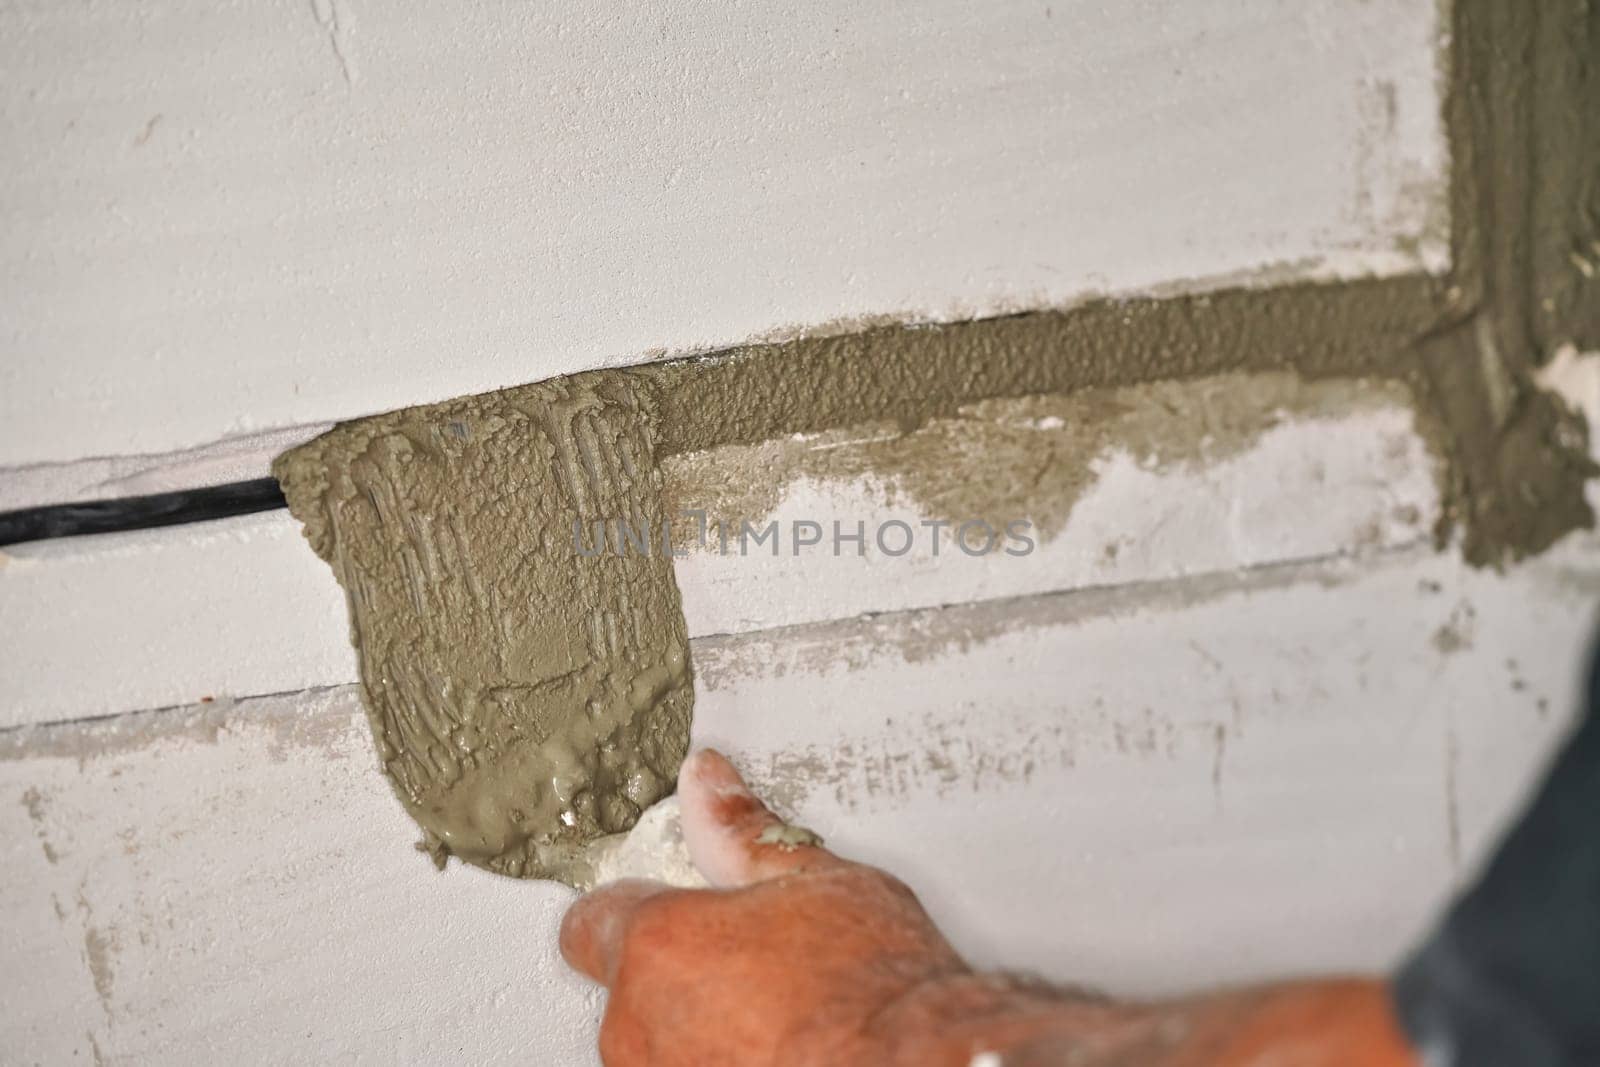 Construction worker securing electric sockets groove installed on bare wall with mortar cement paste - filling holes using small scoop, detail to hands only.